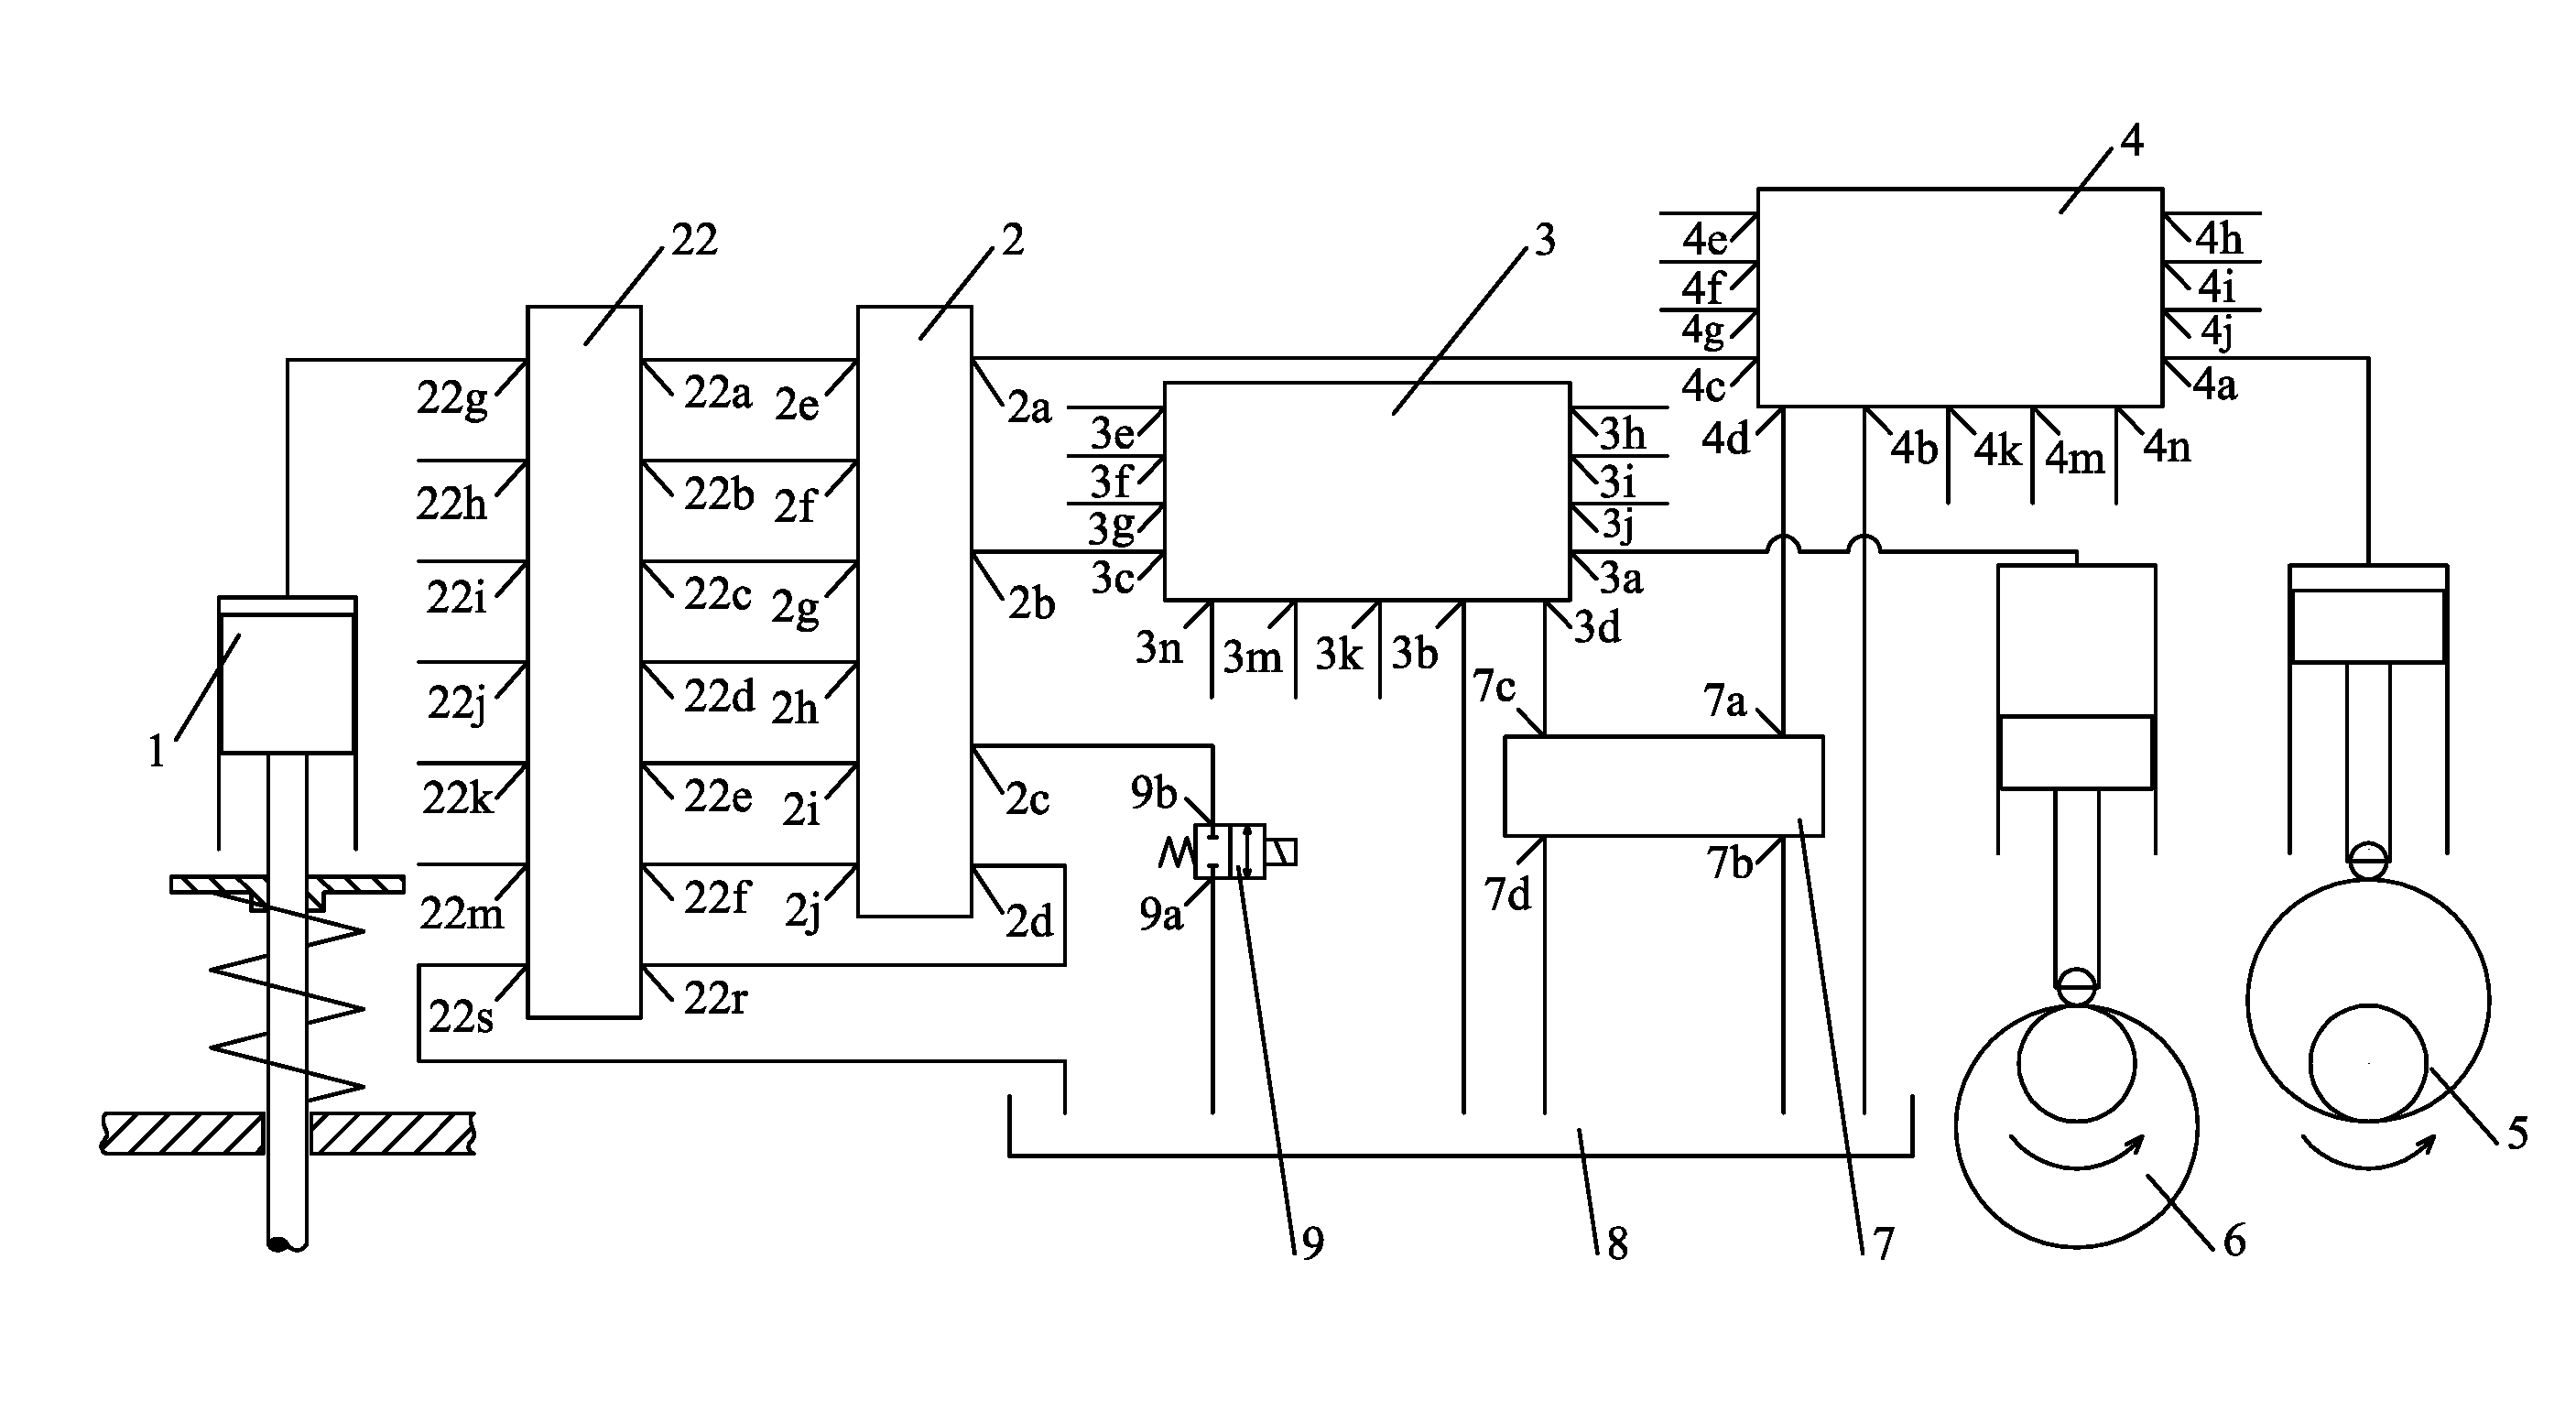 Modularized multifunctional variable valve actuation system for use in 6-cylinder internal combustion engine